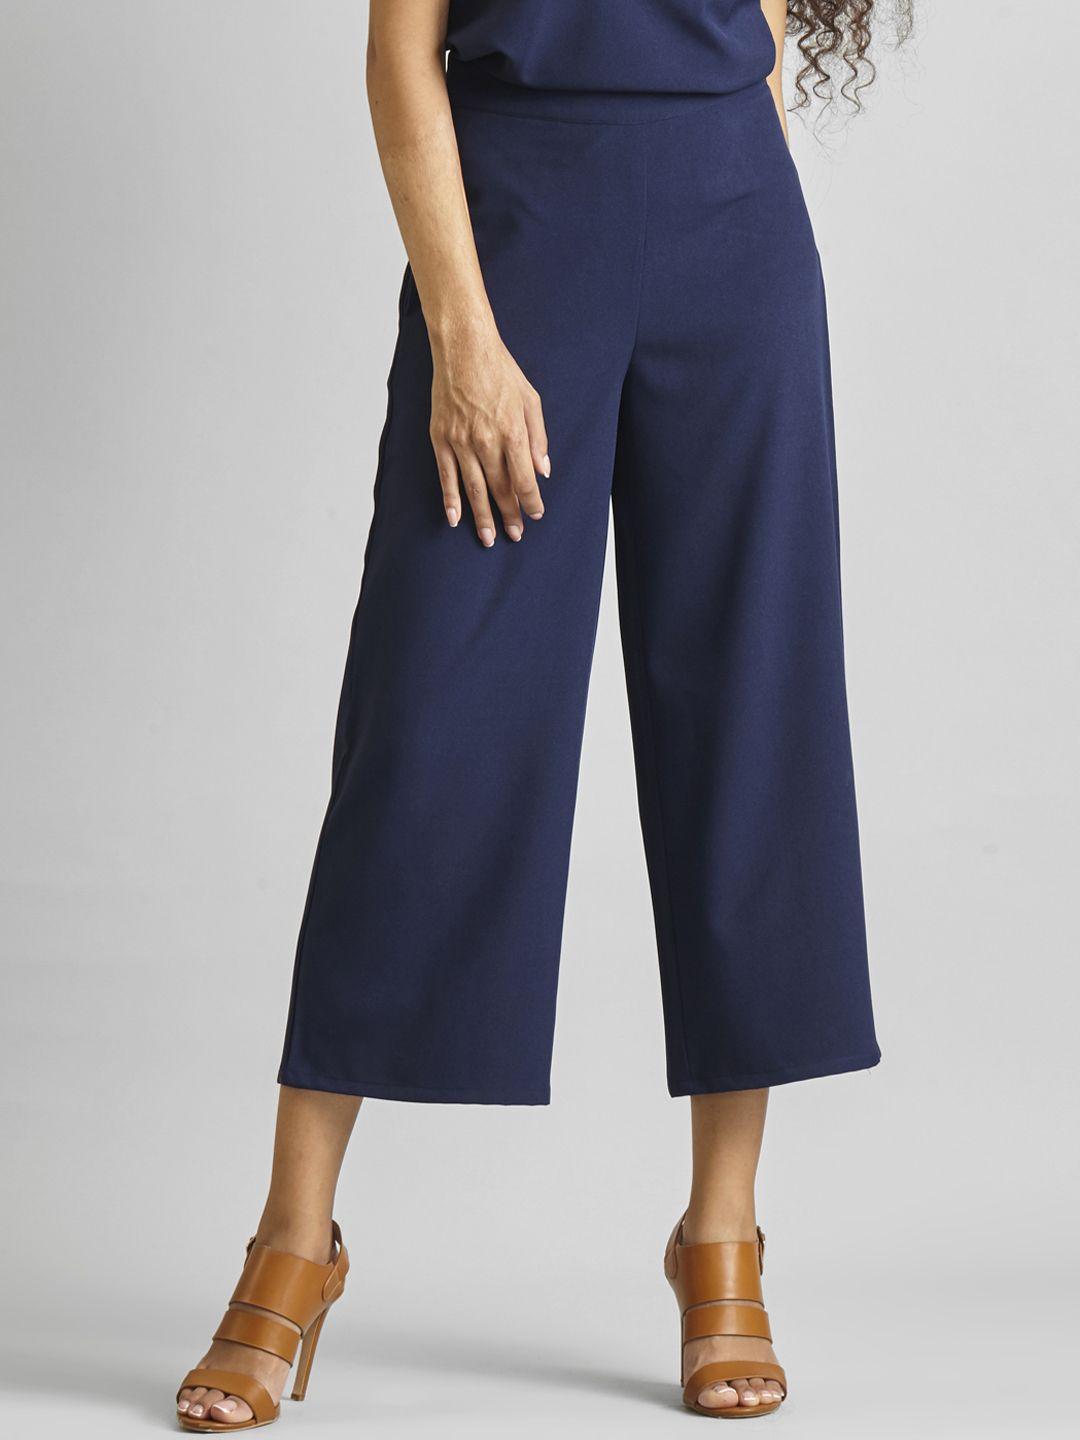 fablestreet women navy blue flared solid culottes